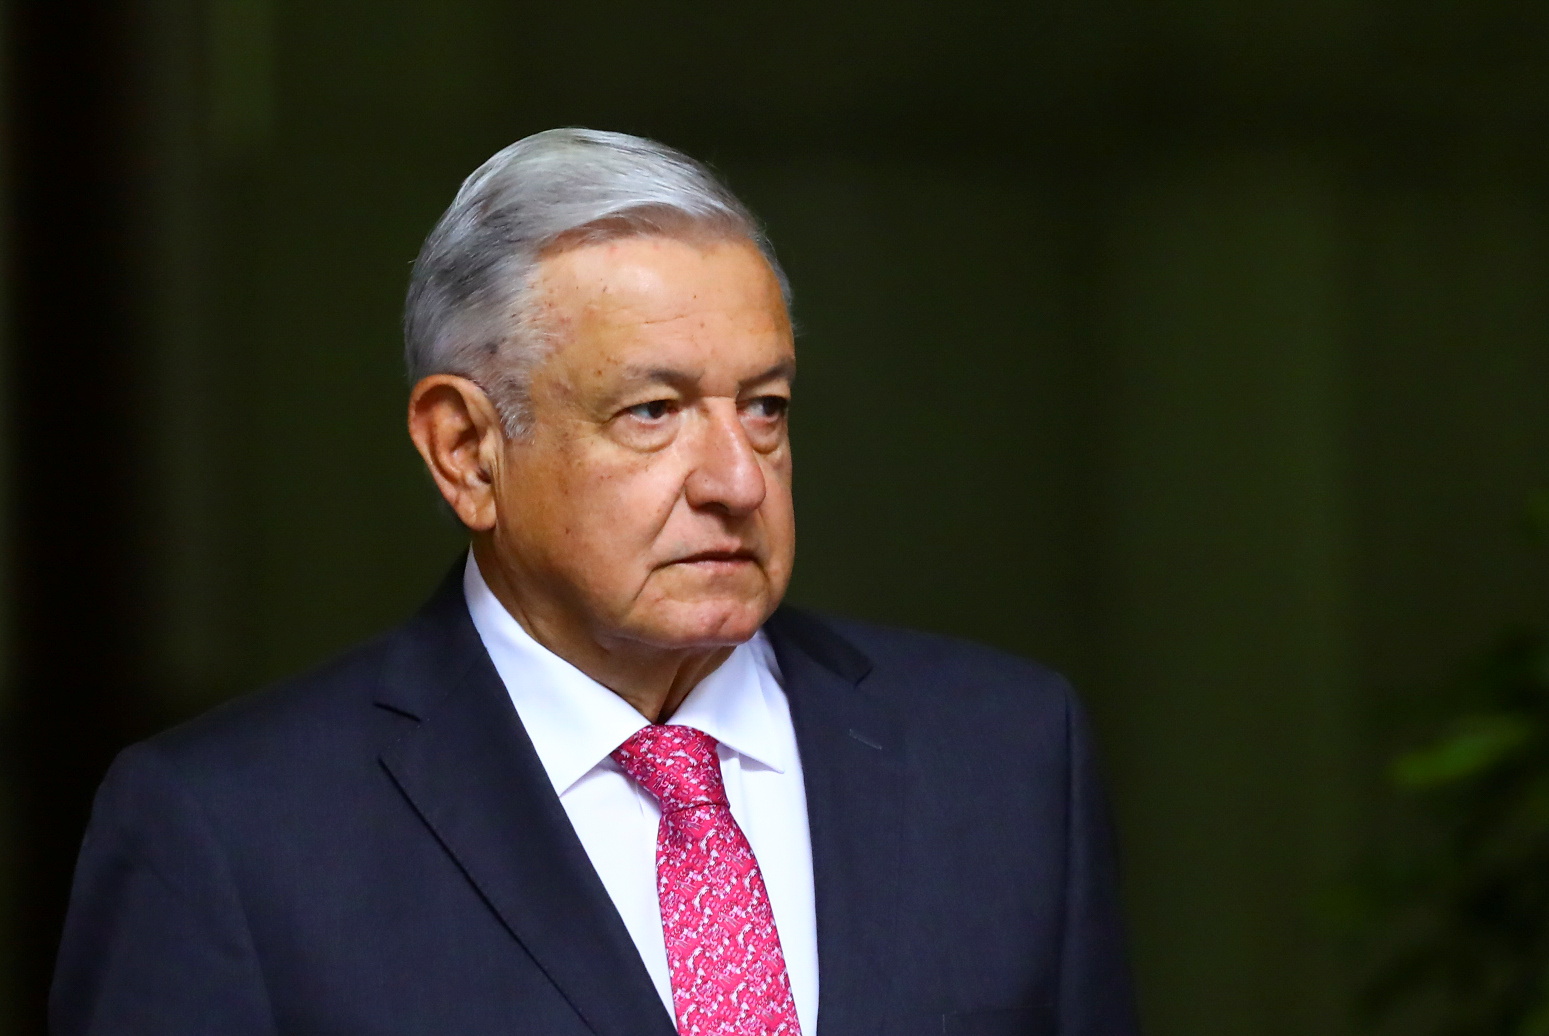 Mexico's President Andres Manuel Lopez Obrador participates on a commemoration on the third anniversary of his presidential election victory at National Palace in Mexico City, Mexico July 1, 2021. REUTERS/Edgard Garrido